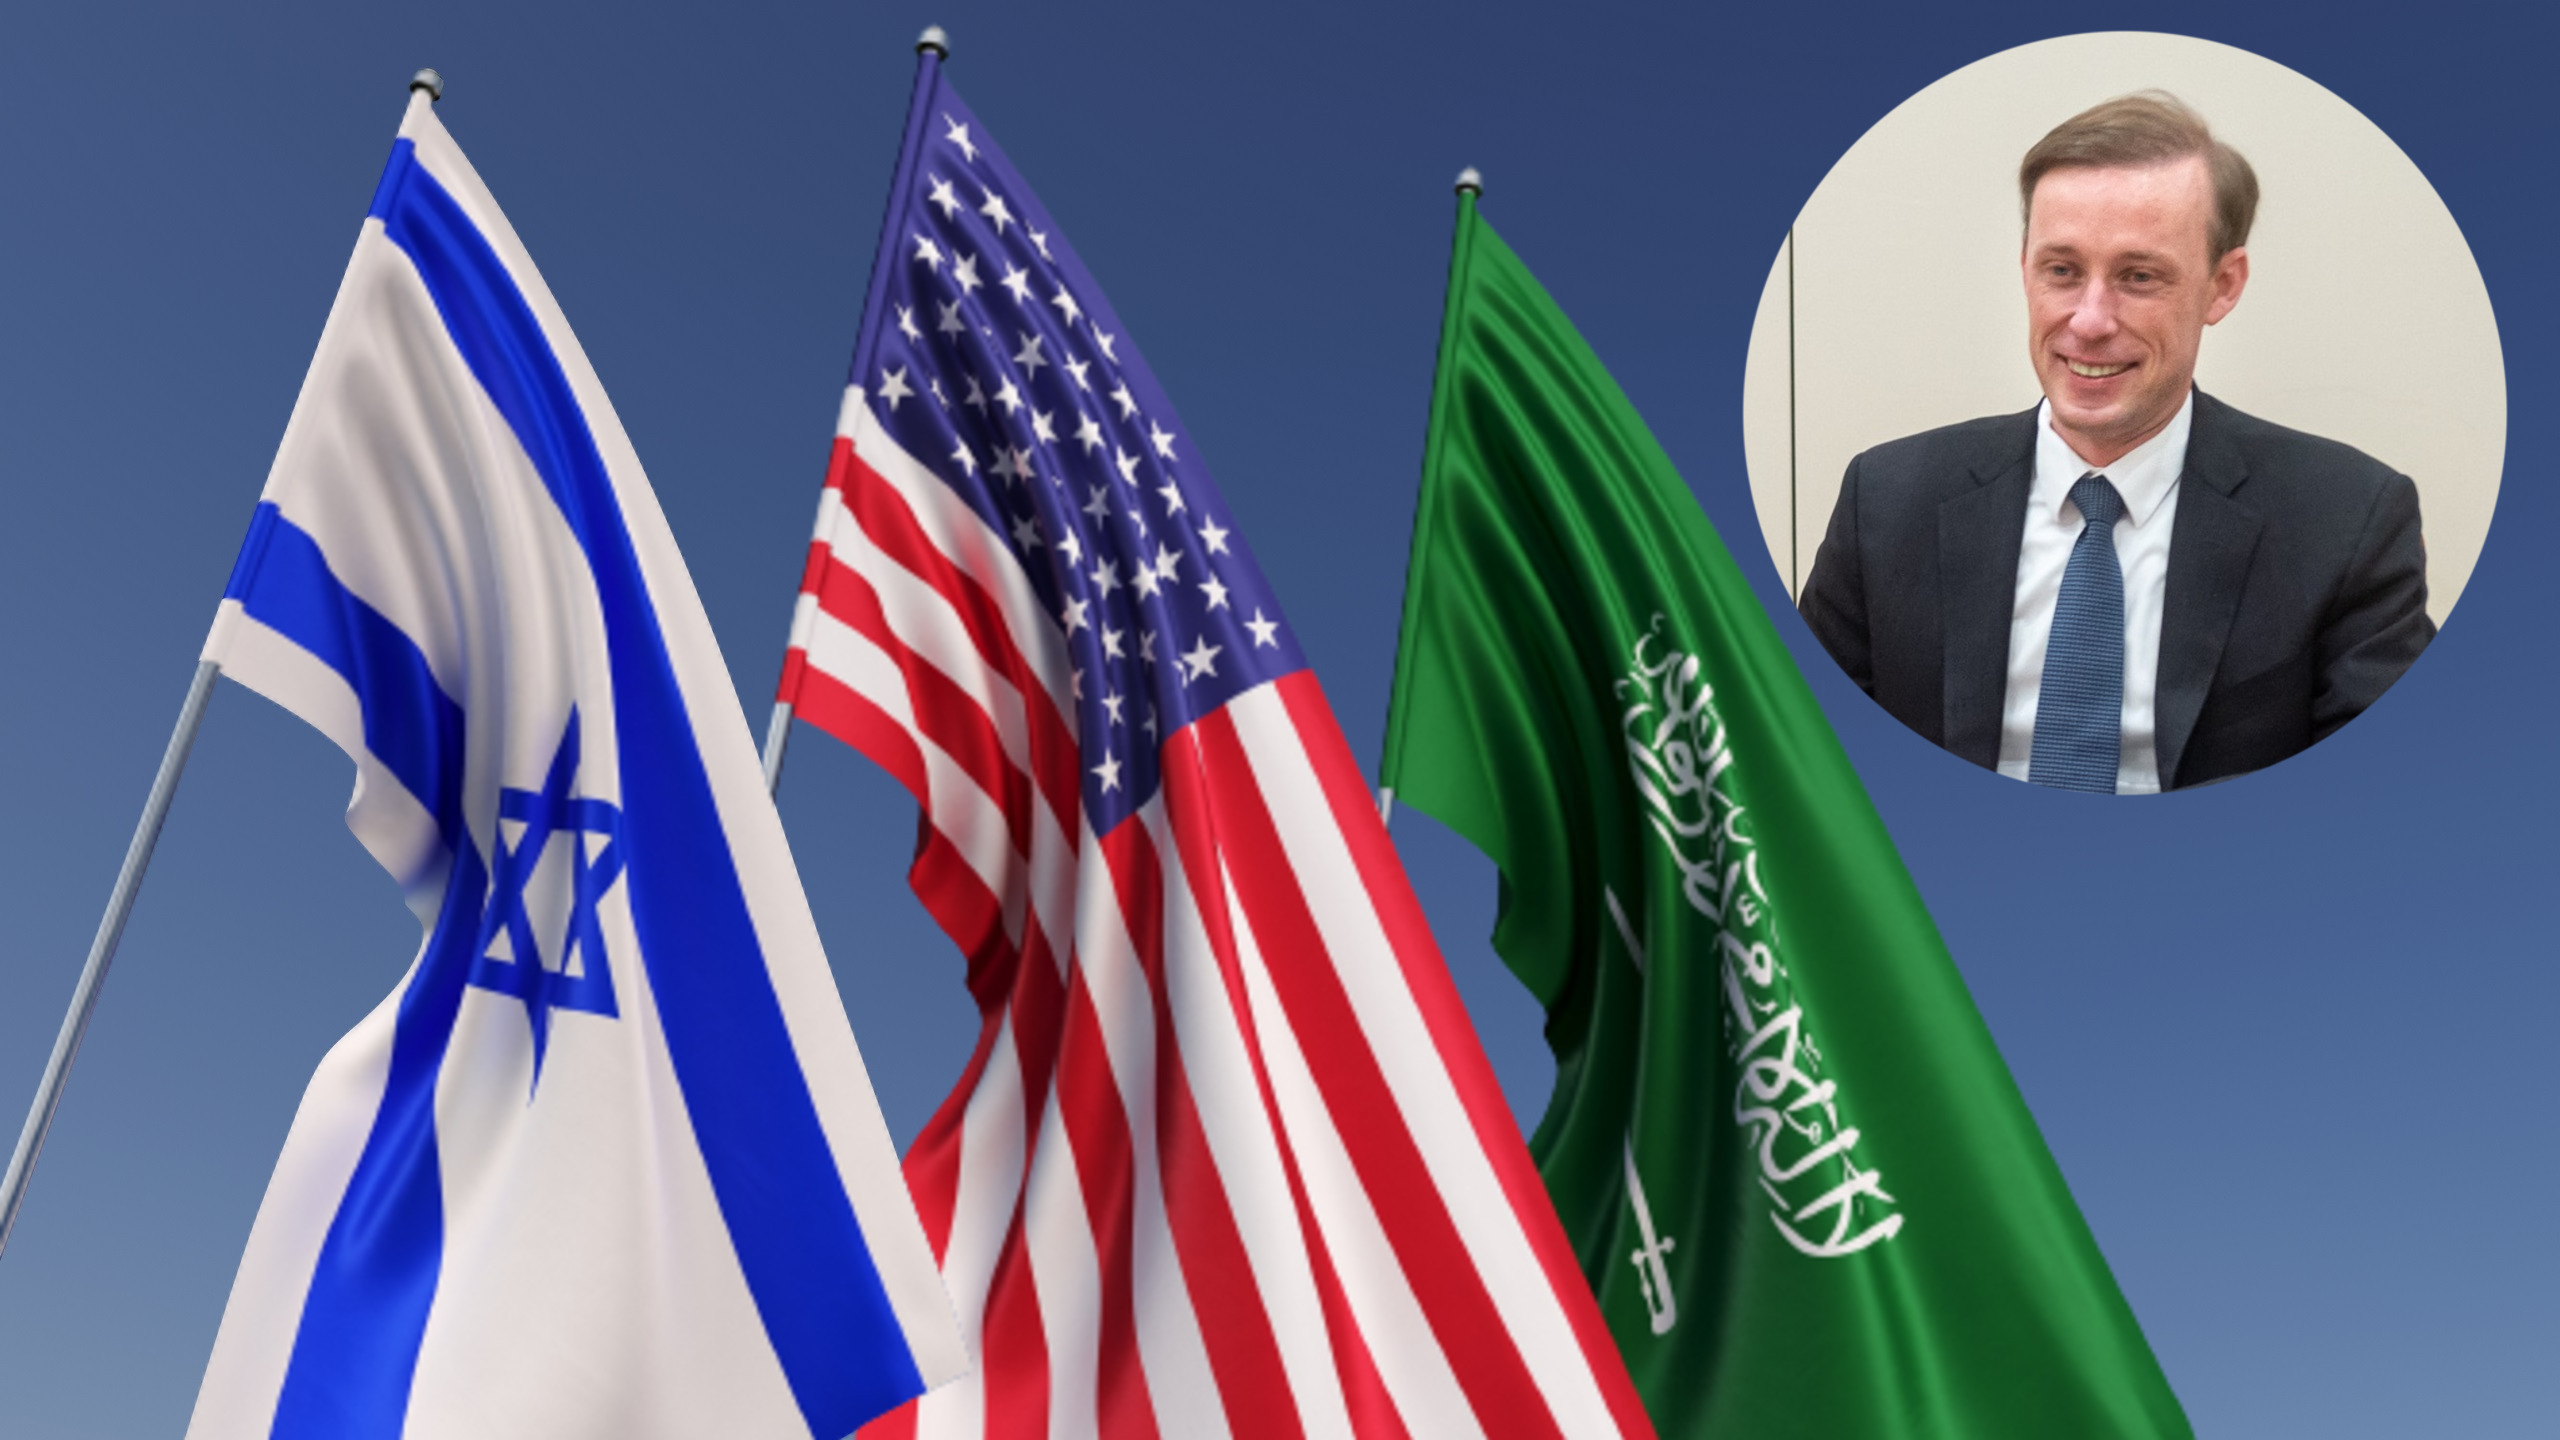 US Aims to Normalize Israel-Saudi Arabia Relations, Officials Say